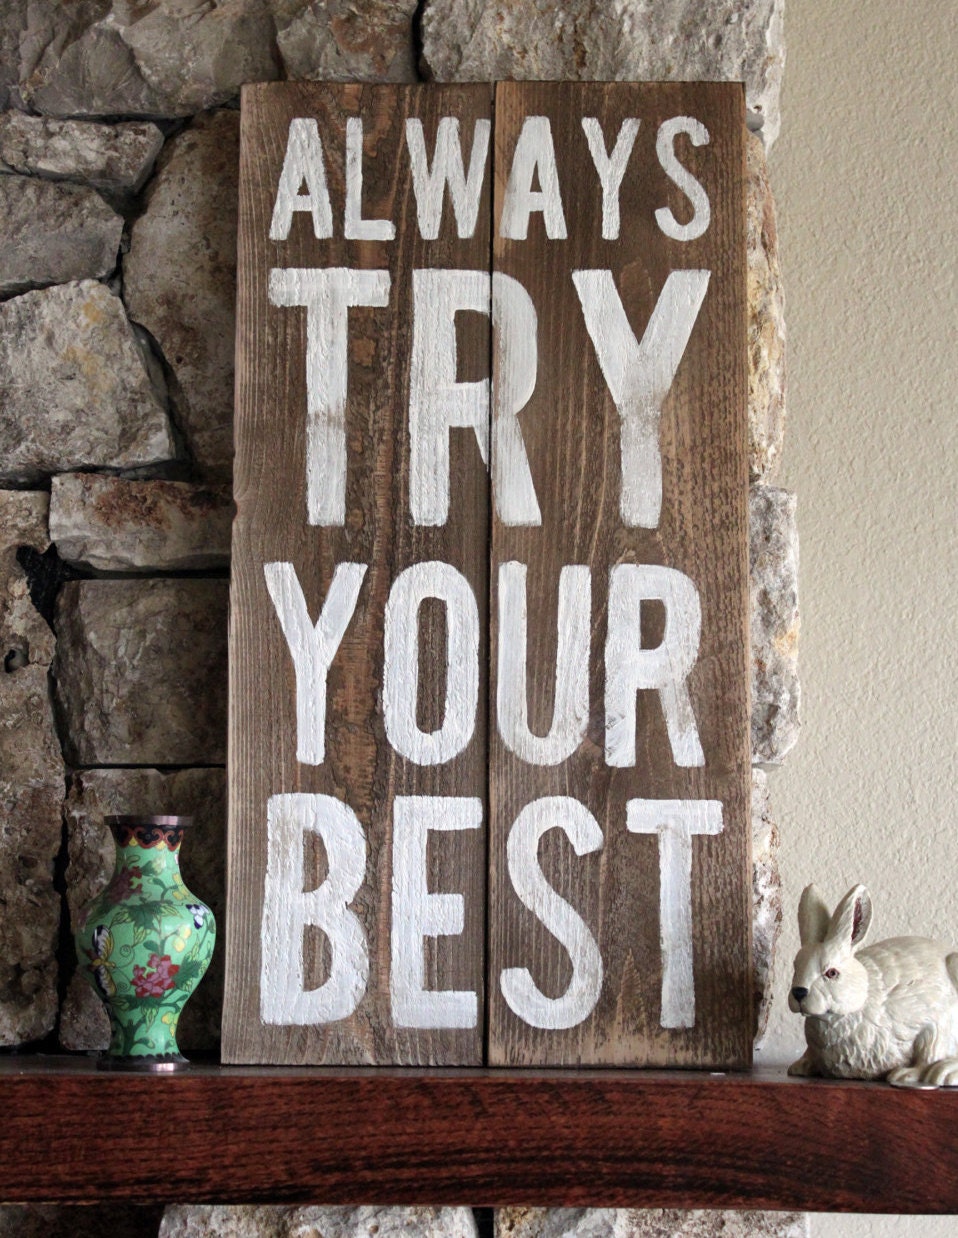 Always do your best. Do you best. Do your best. Картинка try your best. You best.